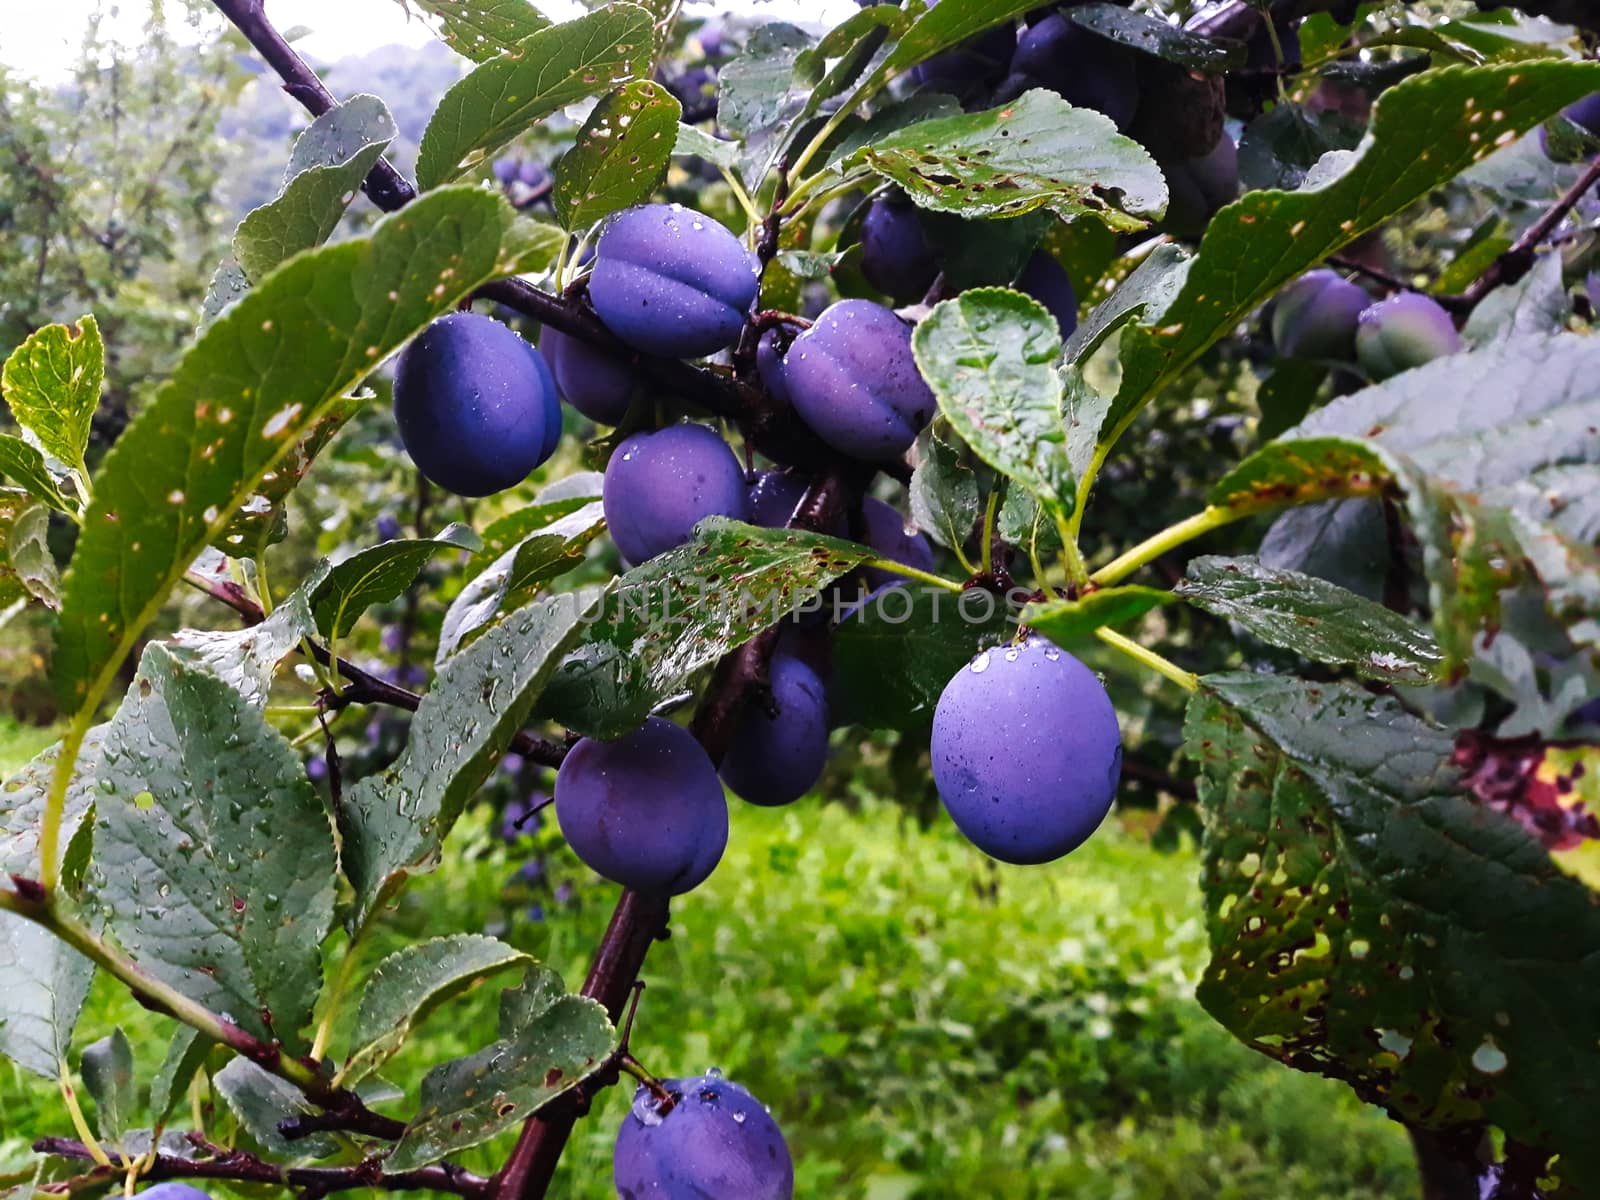 Ripe plums on a branch after rain with water droplets. Zavidovici, Bosnia and Herzegovina.